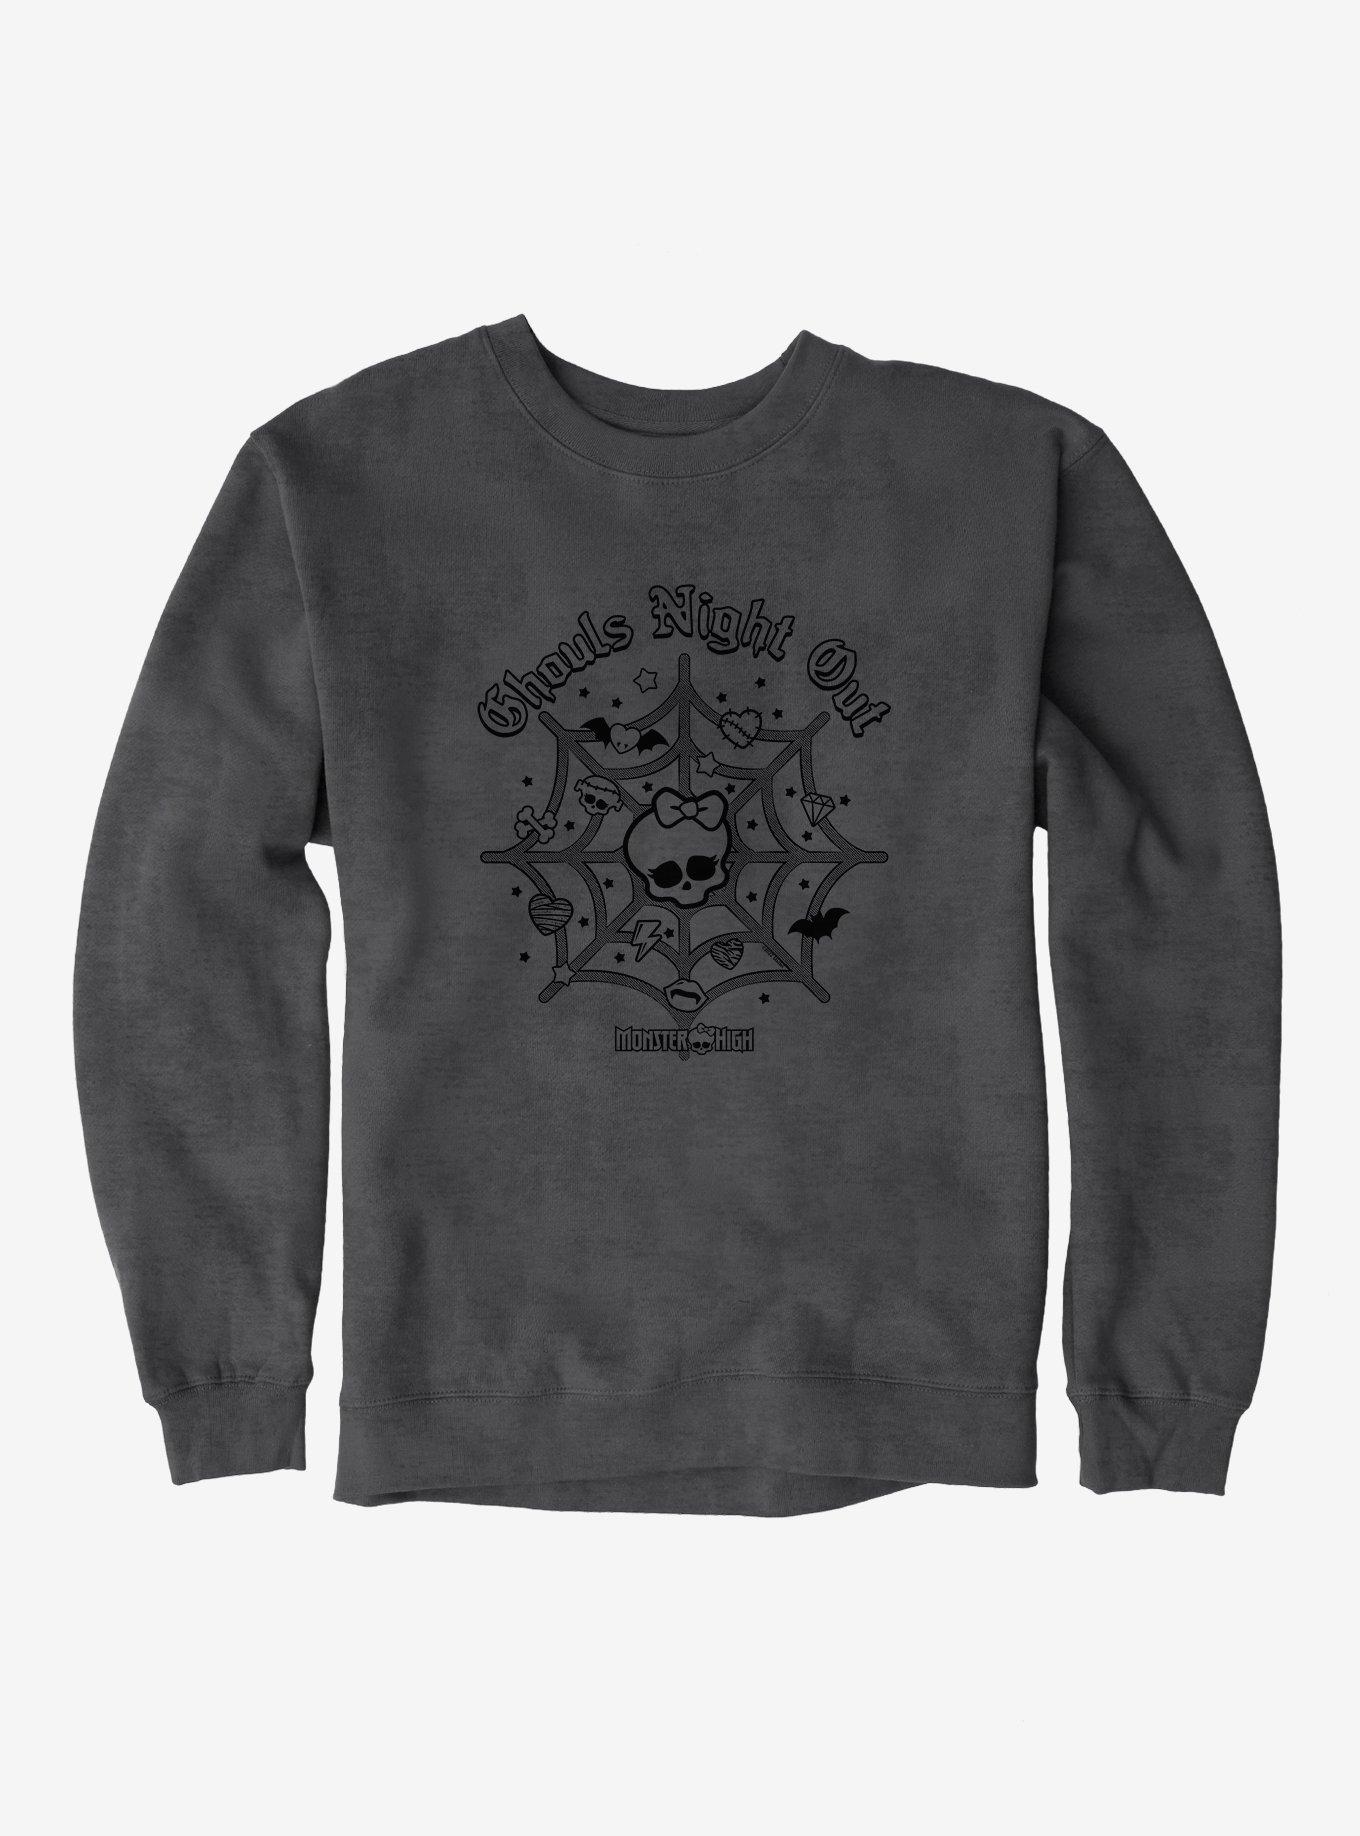 Monster High Ghouls Night Out Spiderweb Sweatshirt, CHARCOAL HEATHER, hi-res